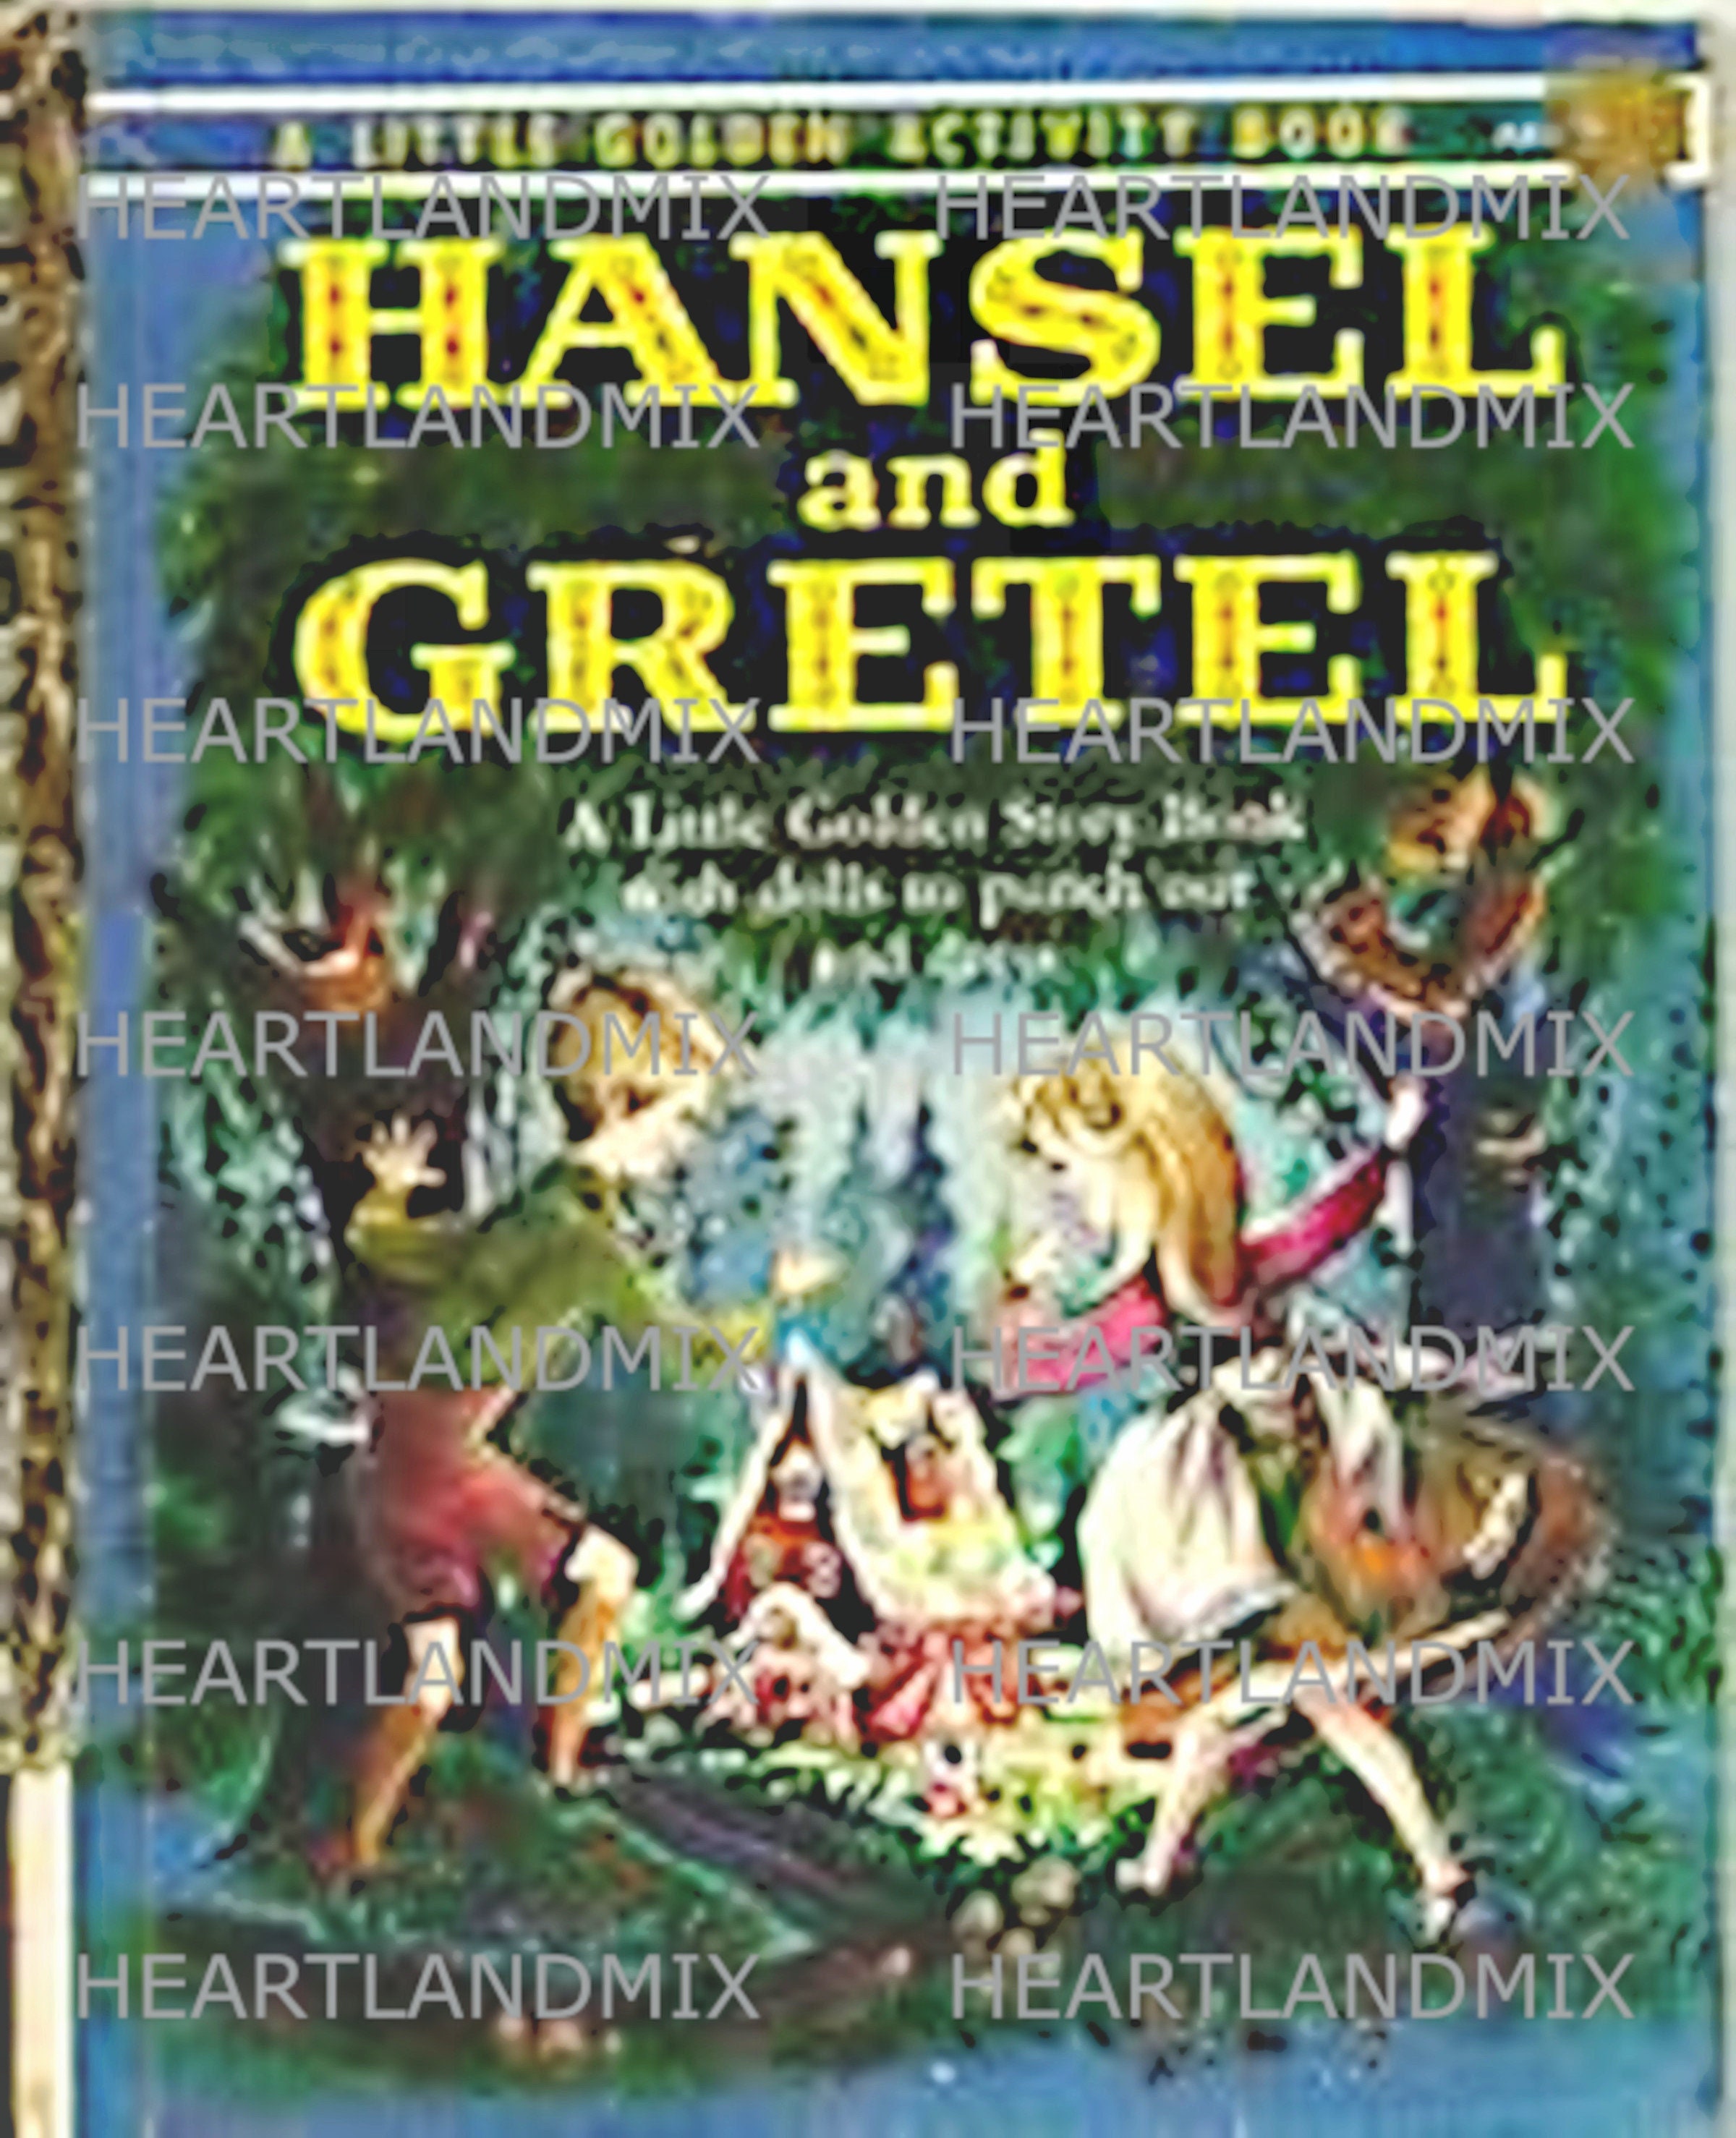 Hansel, Gretel and the witch, from Hansel and Gretel published by Blackie  and Son Limited, c.1940